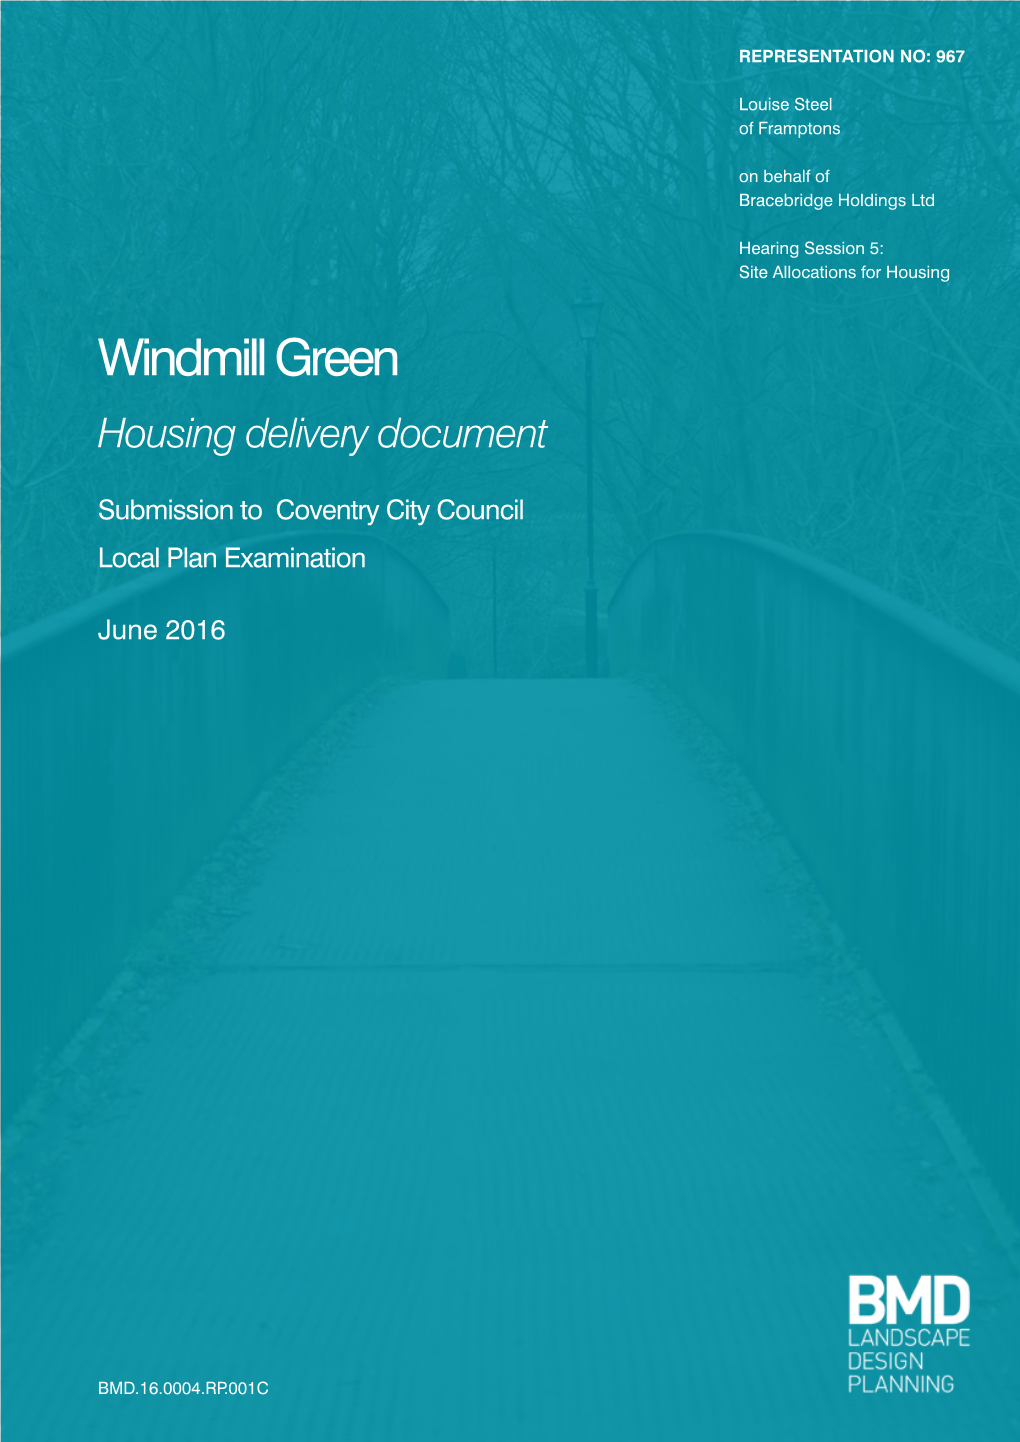 Windmill Green Housing Delivery Document